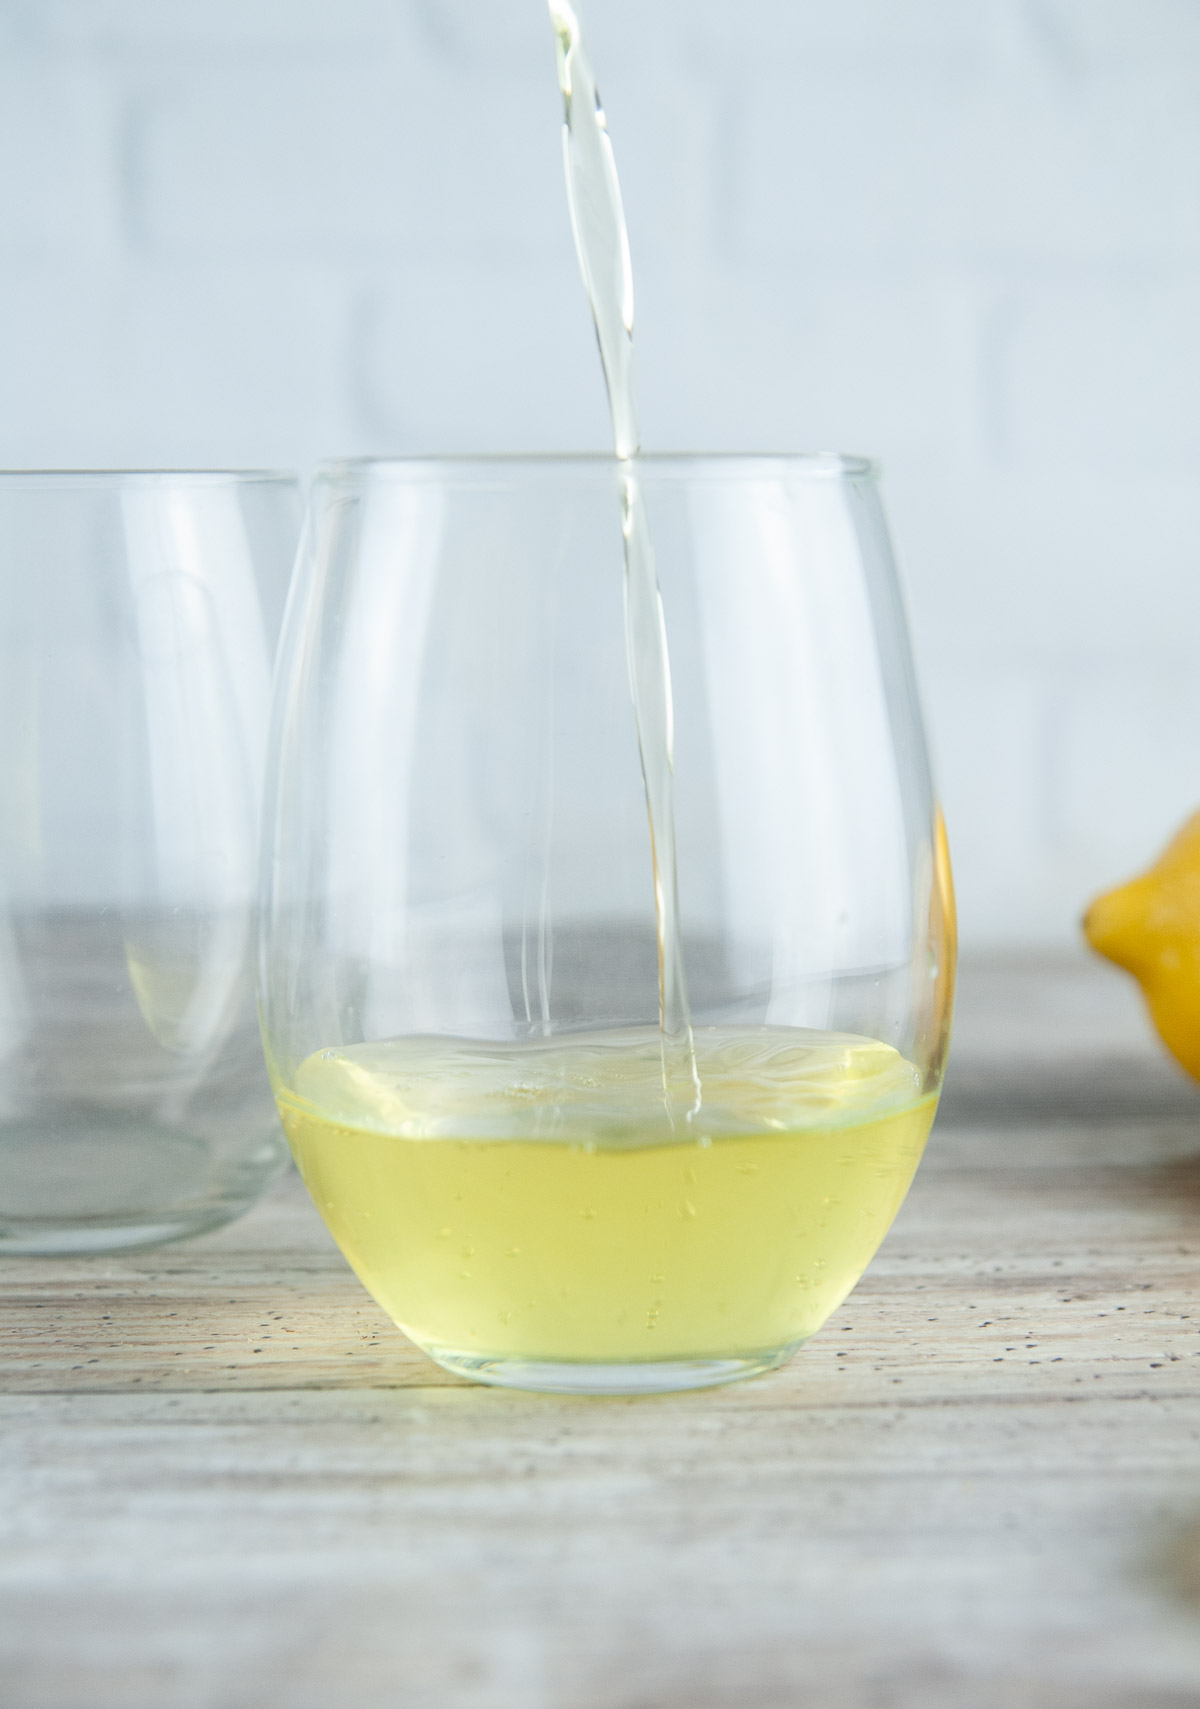 Pour chilled limoncello into a glass.